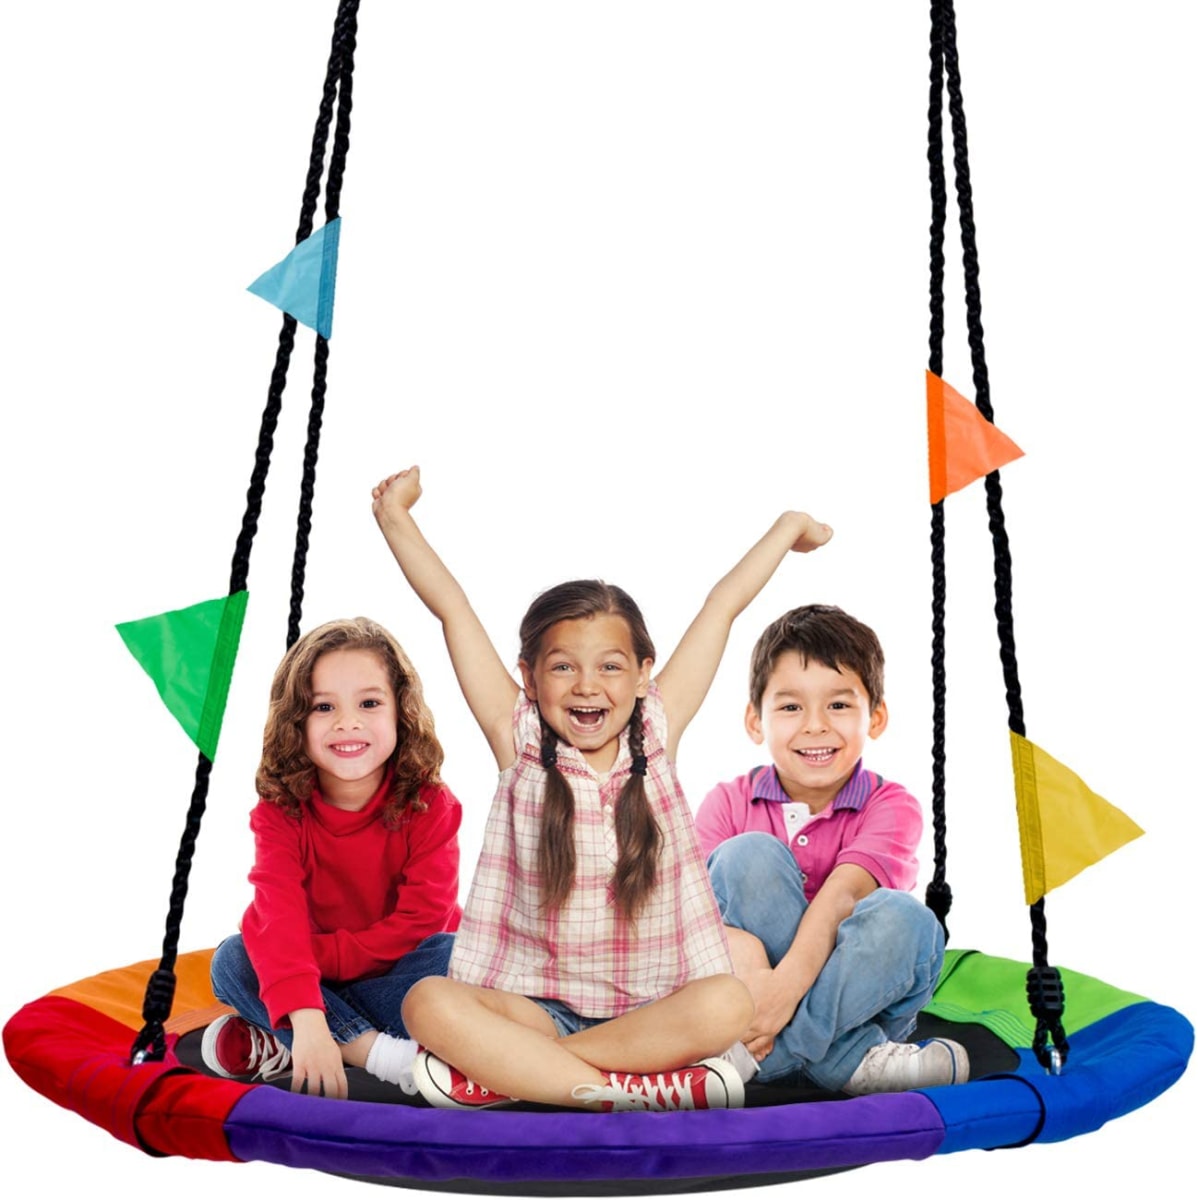 Saucer Tree Swing 40 Inch in Multi-Color Rainbow – Kids Indoor/Outdoor Round Mat Swing – Great for Tree, Swing Set, Backyard, Playground, Playroom – Accessories Included